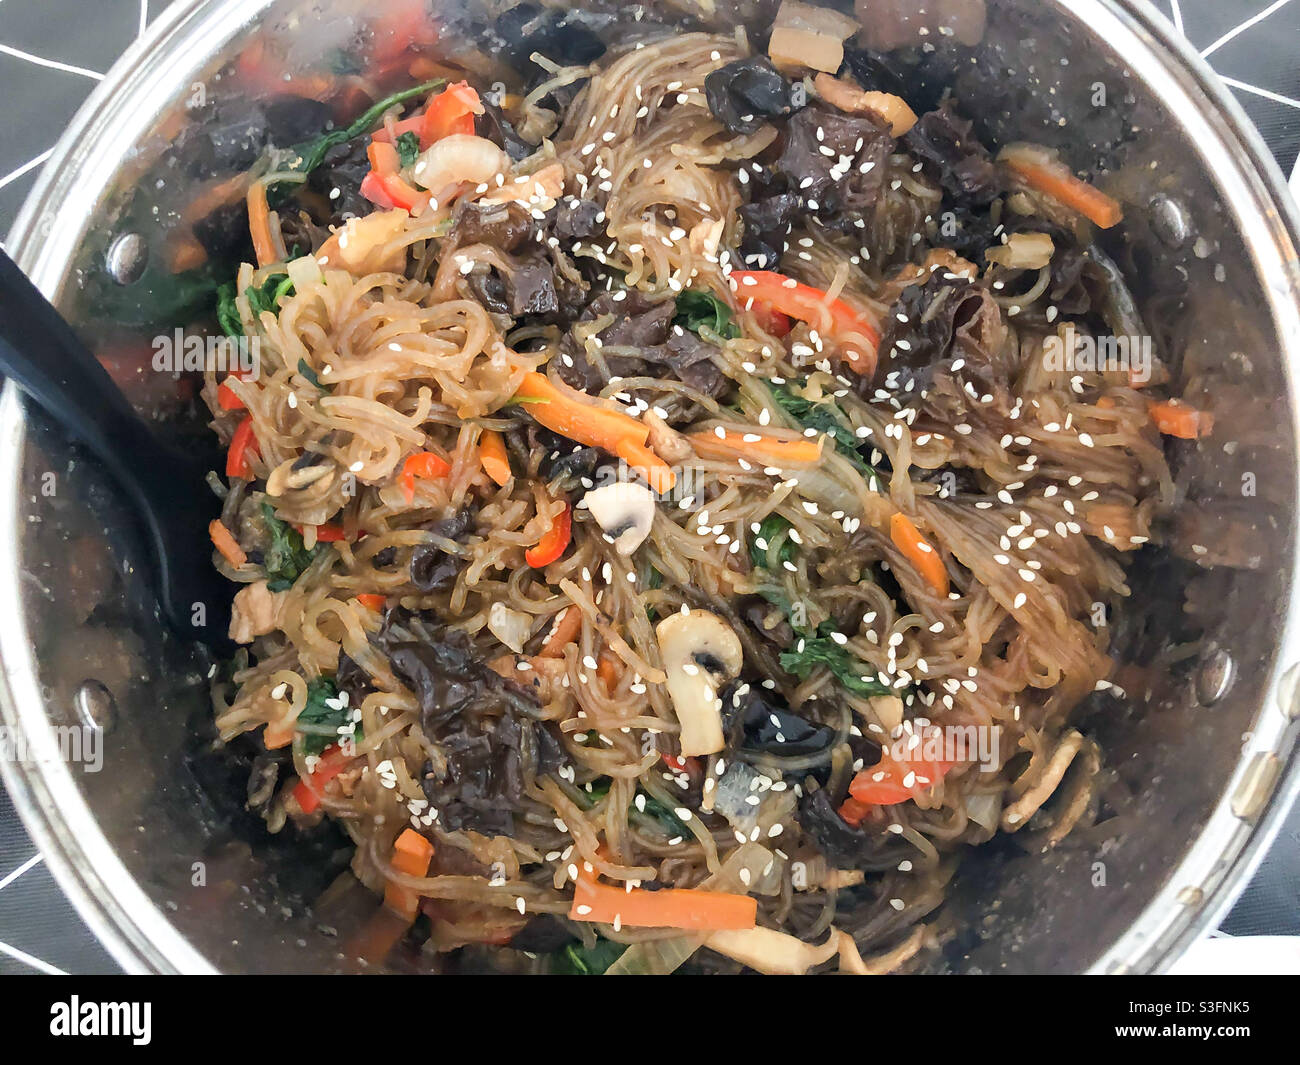 Korean style noodles with vegetables and sesame seeds. Stock Photo